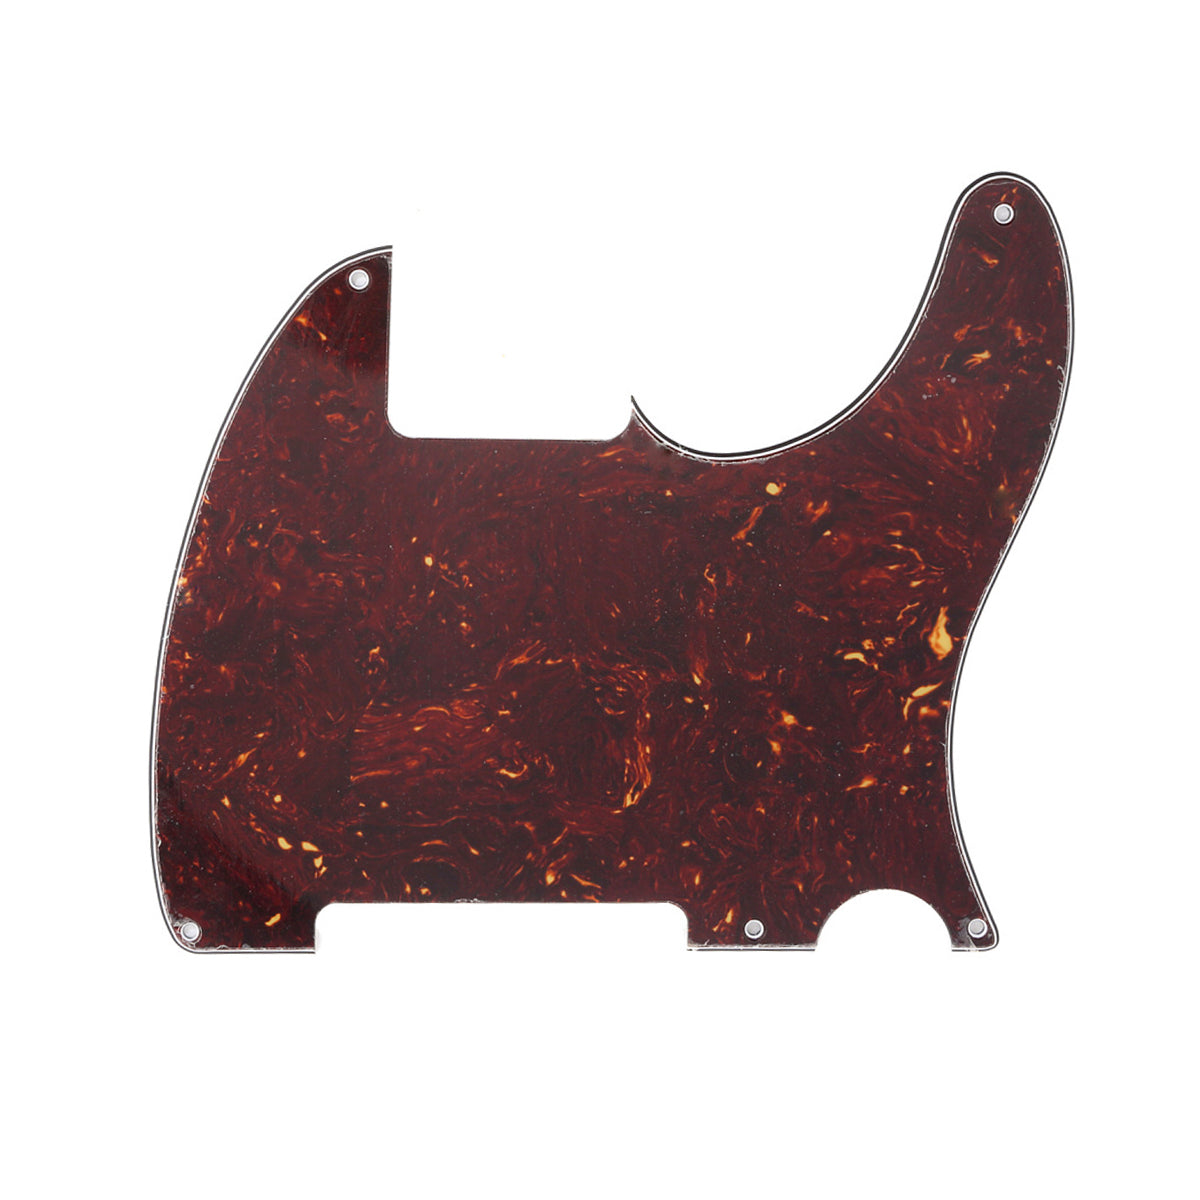 Musiclily 5 Hole Tele Pickguard Blank for Fender USA/Mexican Telecaster Esquire Guitar, 4Ply Tortoise Shell